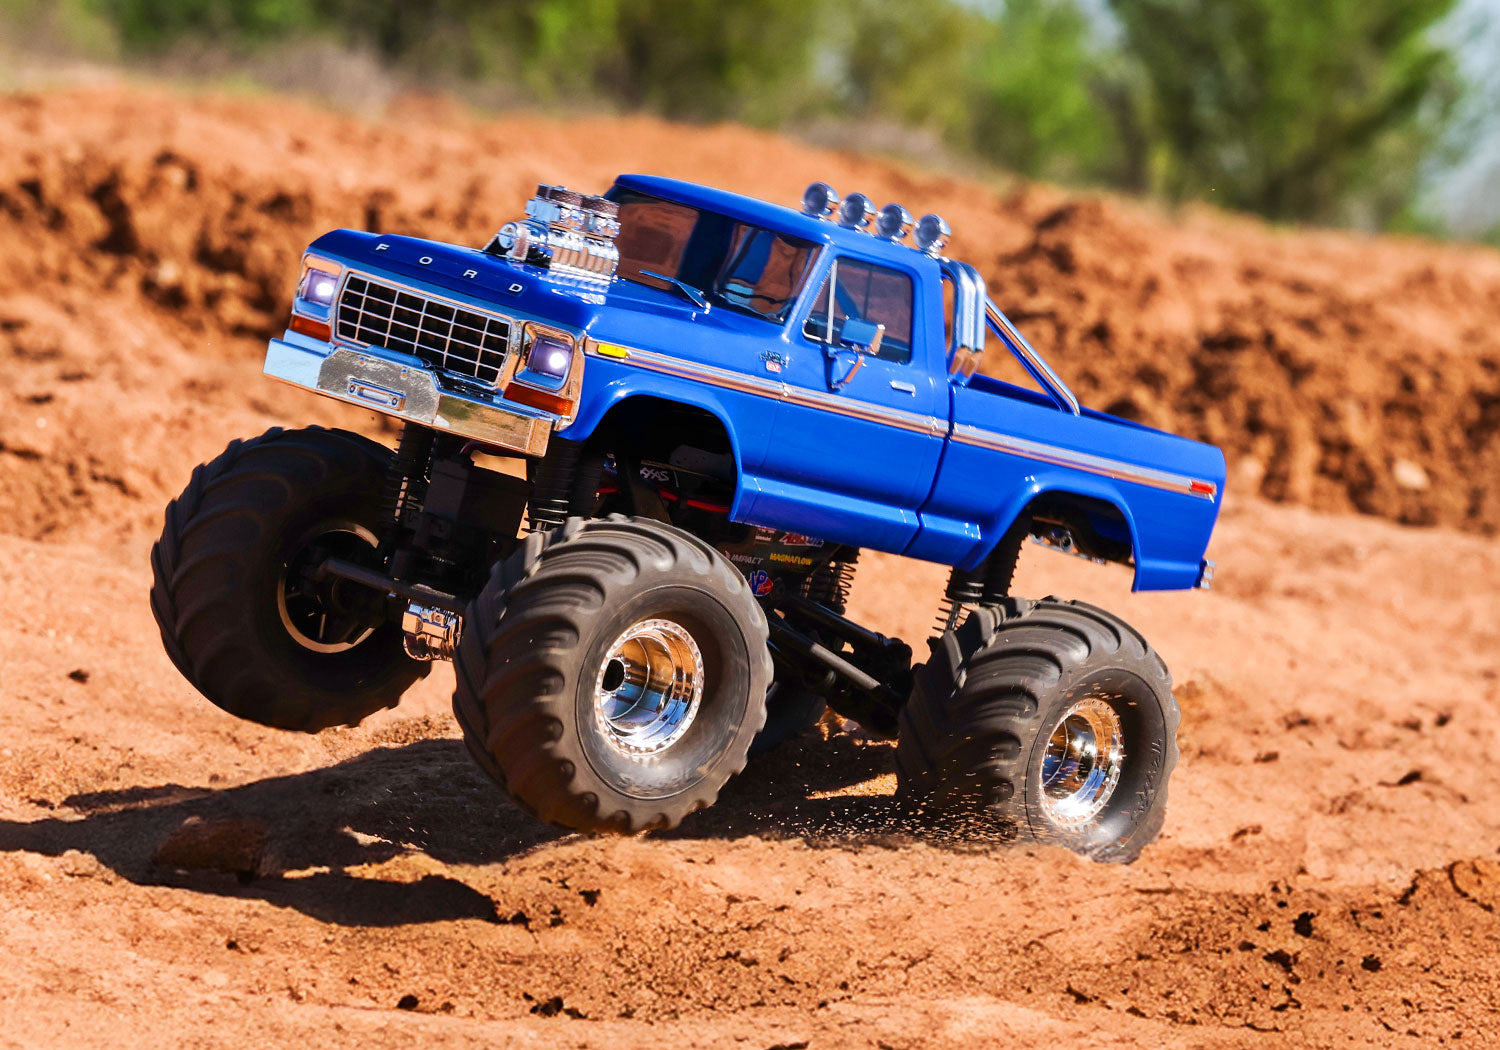 98044-1 TRX-4MT Ford F-150 Monster Truck **IN STORE PICK-UP ONLY**